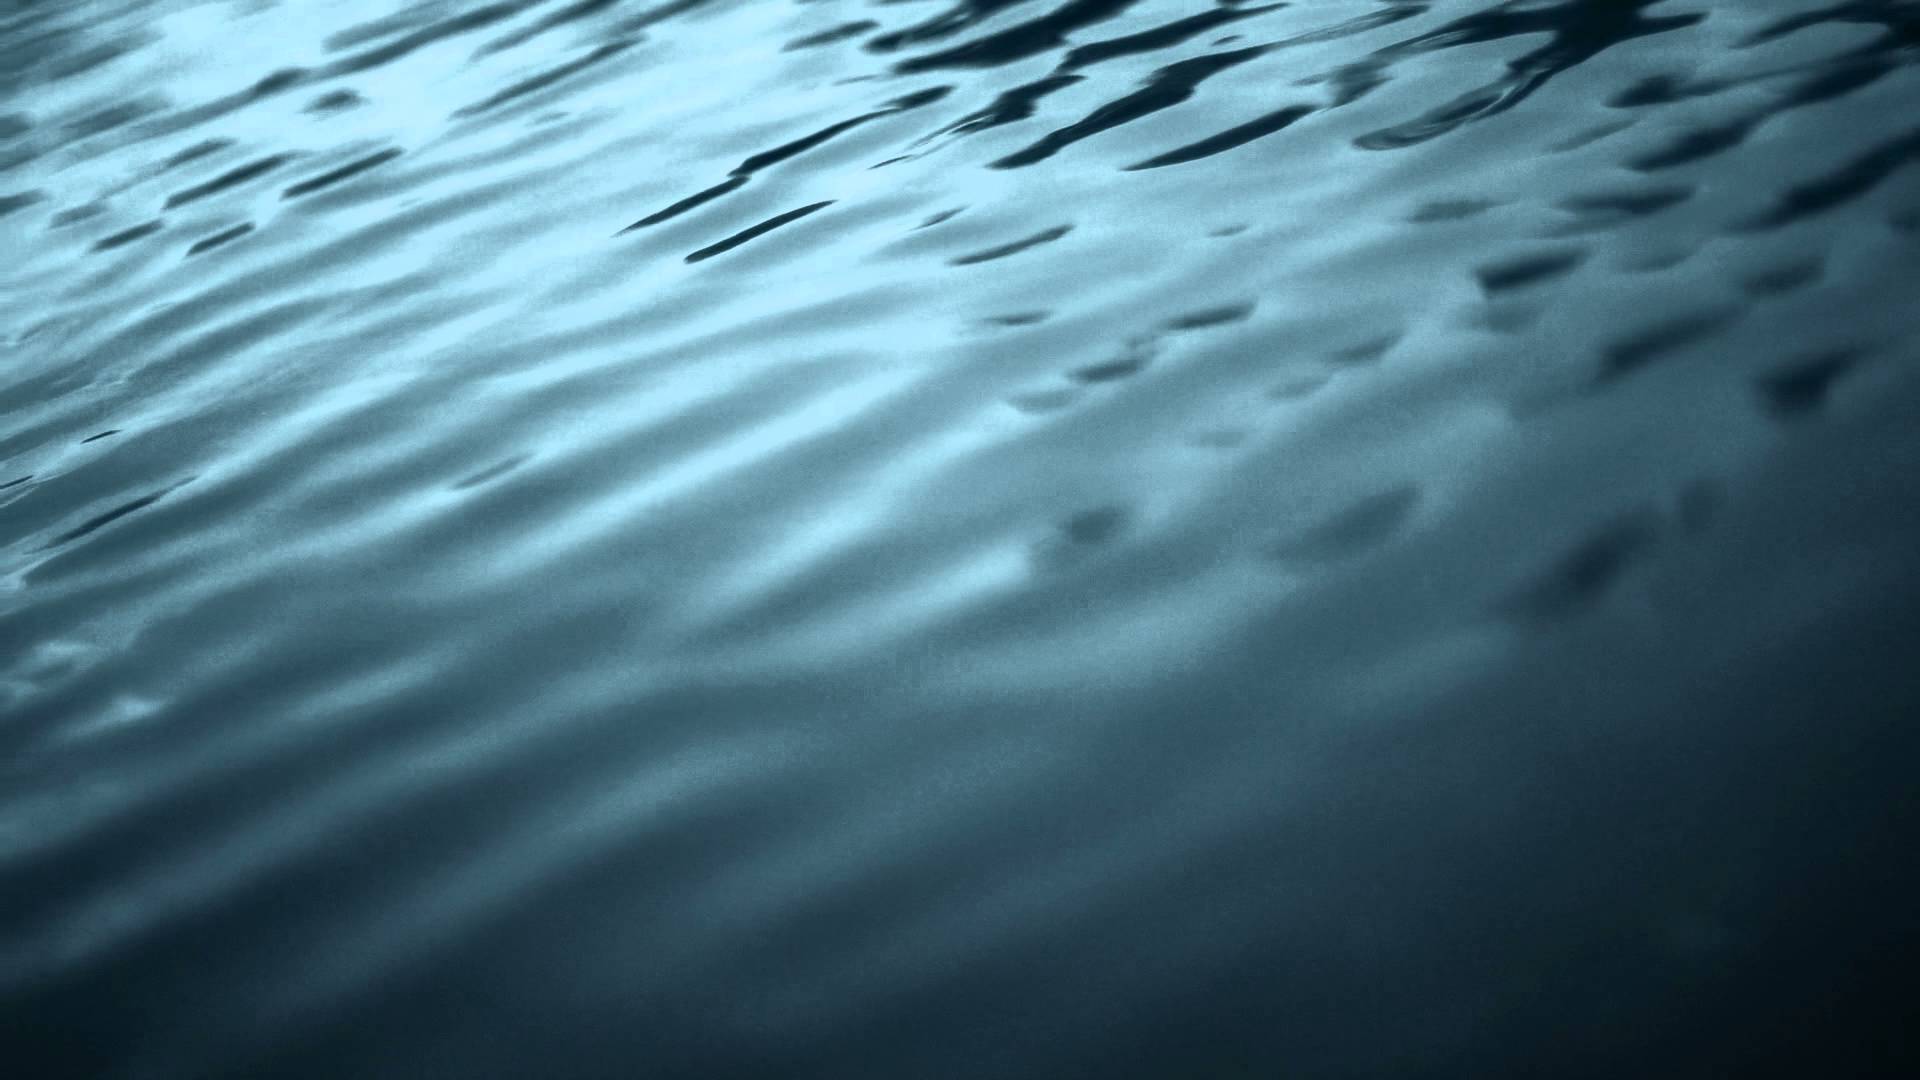 Calm Water - HD Stock Footage Background Loop - YouTube